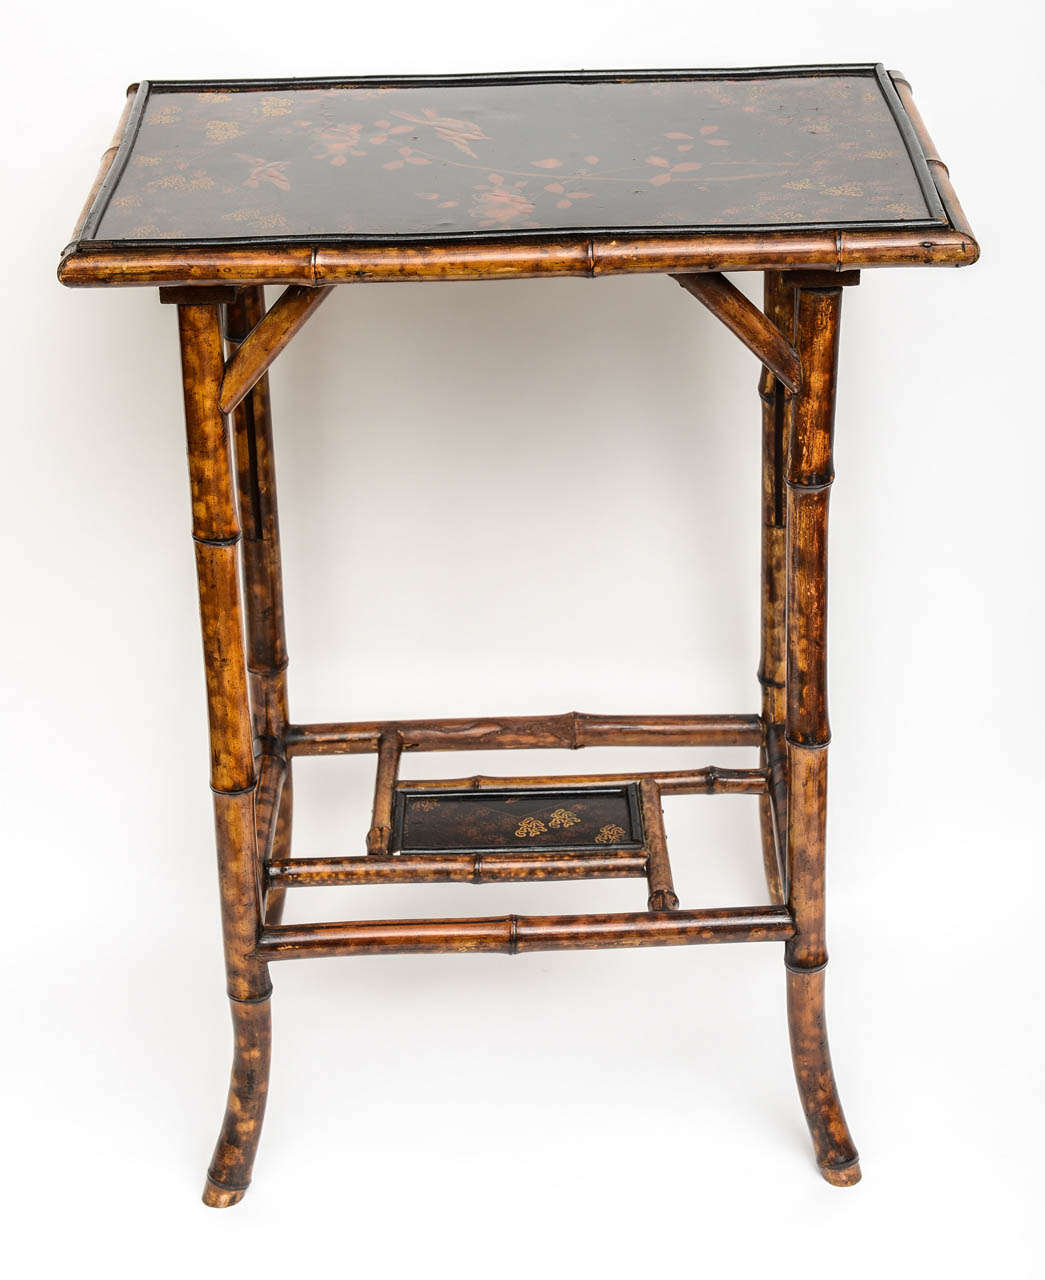 Beautiful rectangular English bamboo table with Japanning on both tops.